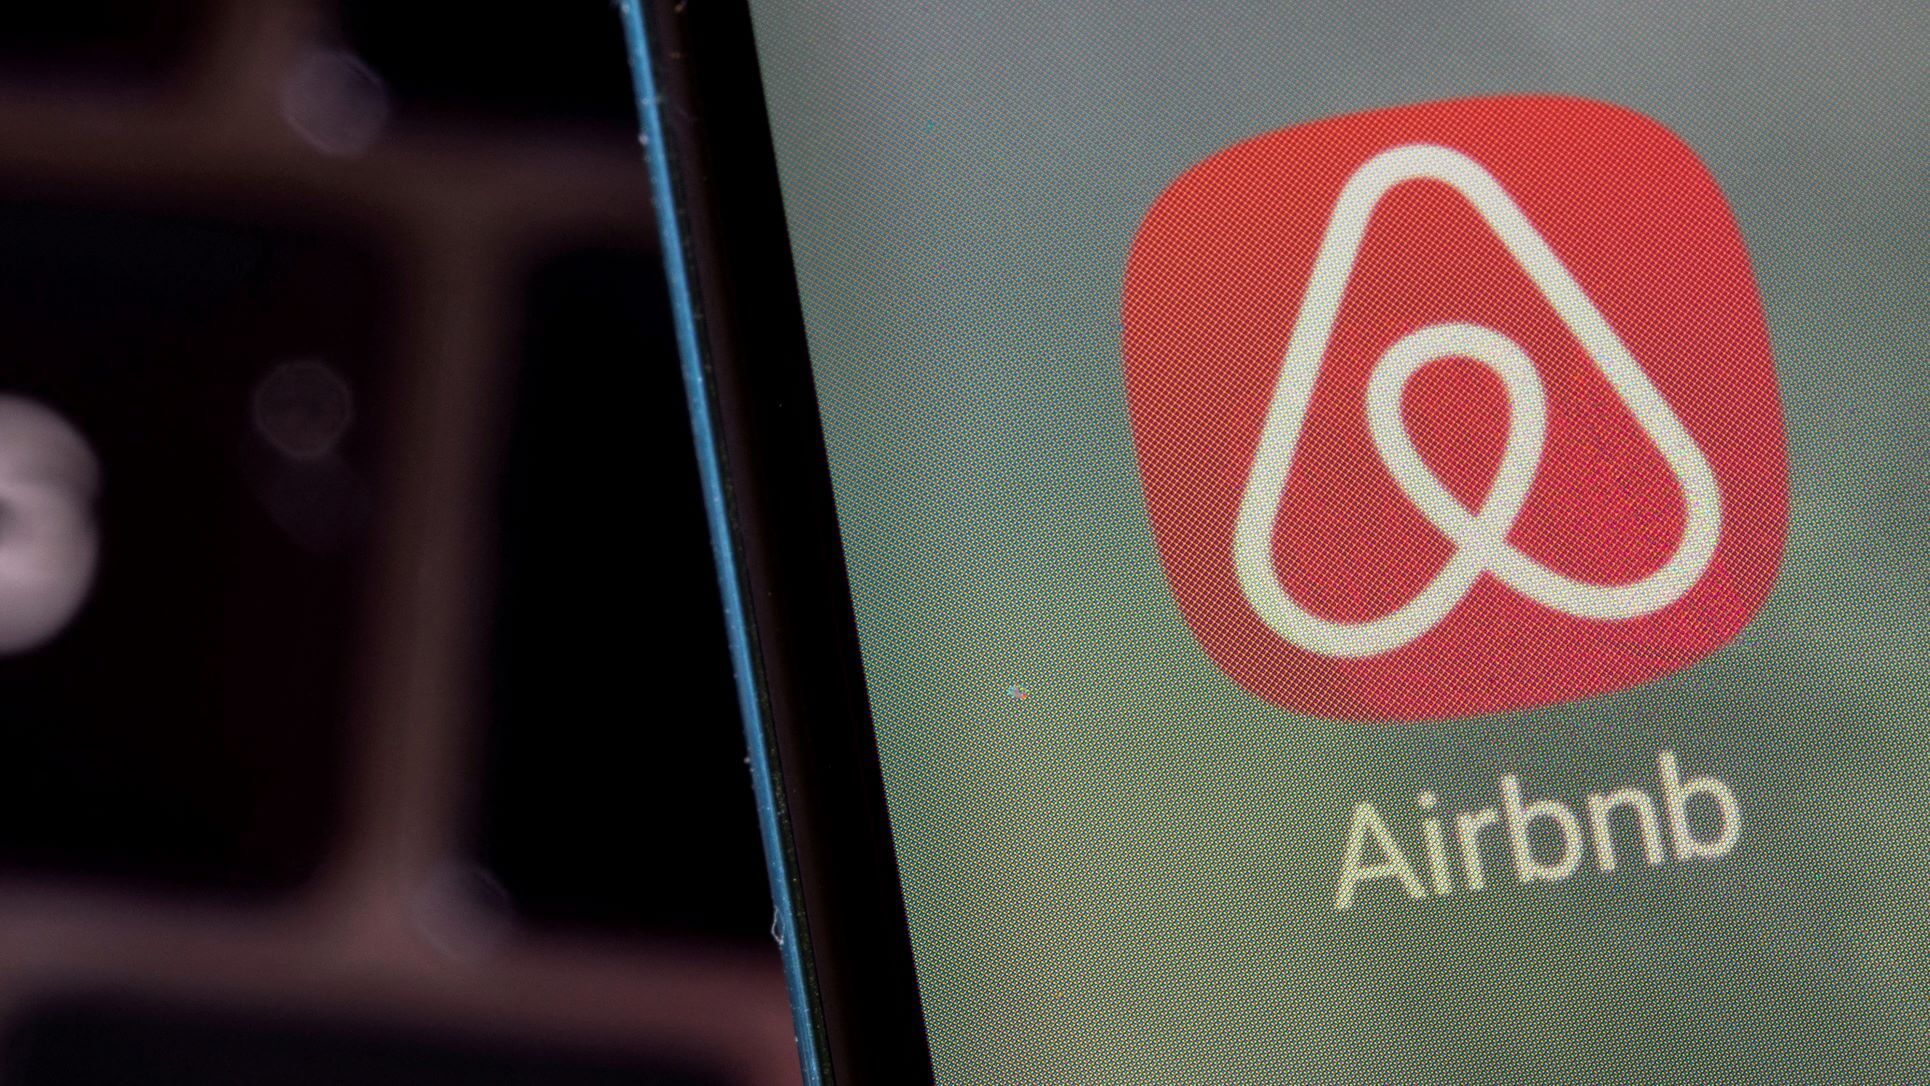 Airbnb Makes Ban On Parties Permanent